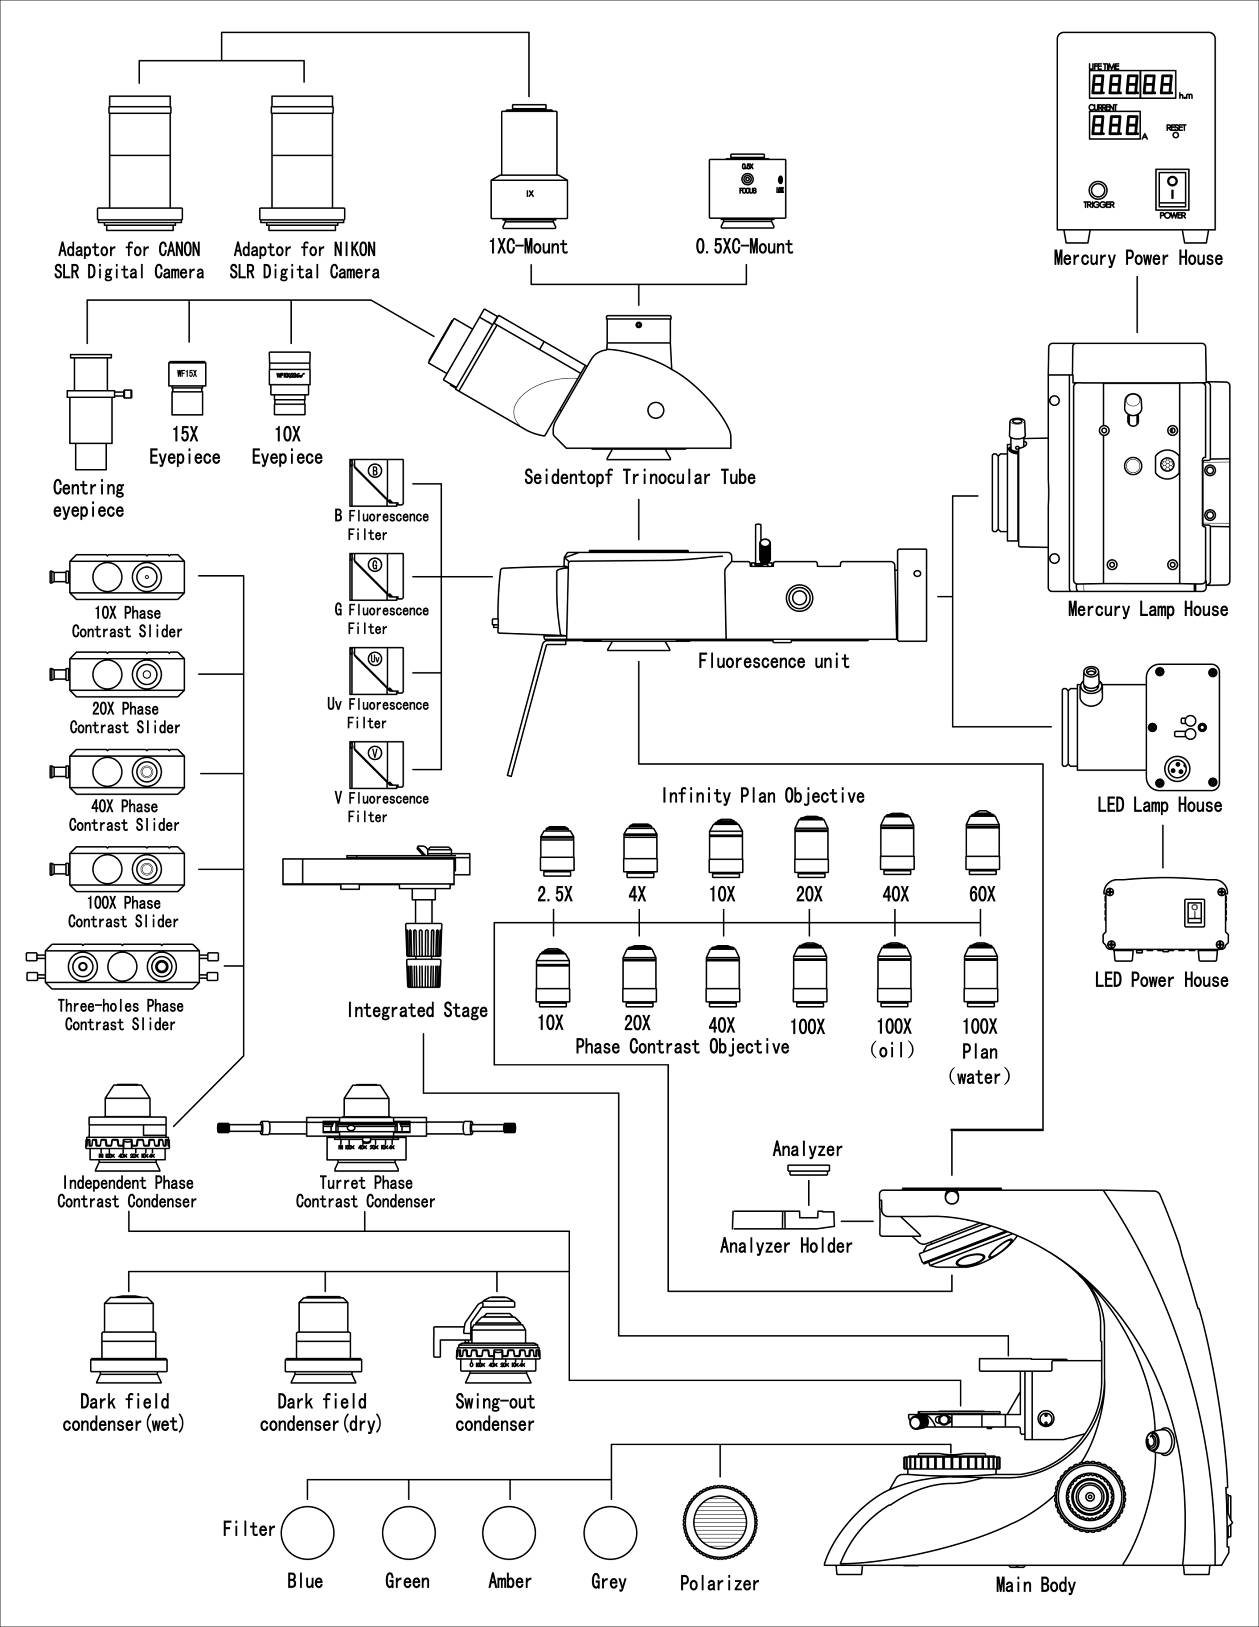 BS-2063 System Diagram